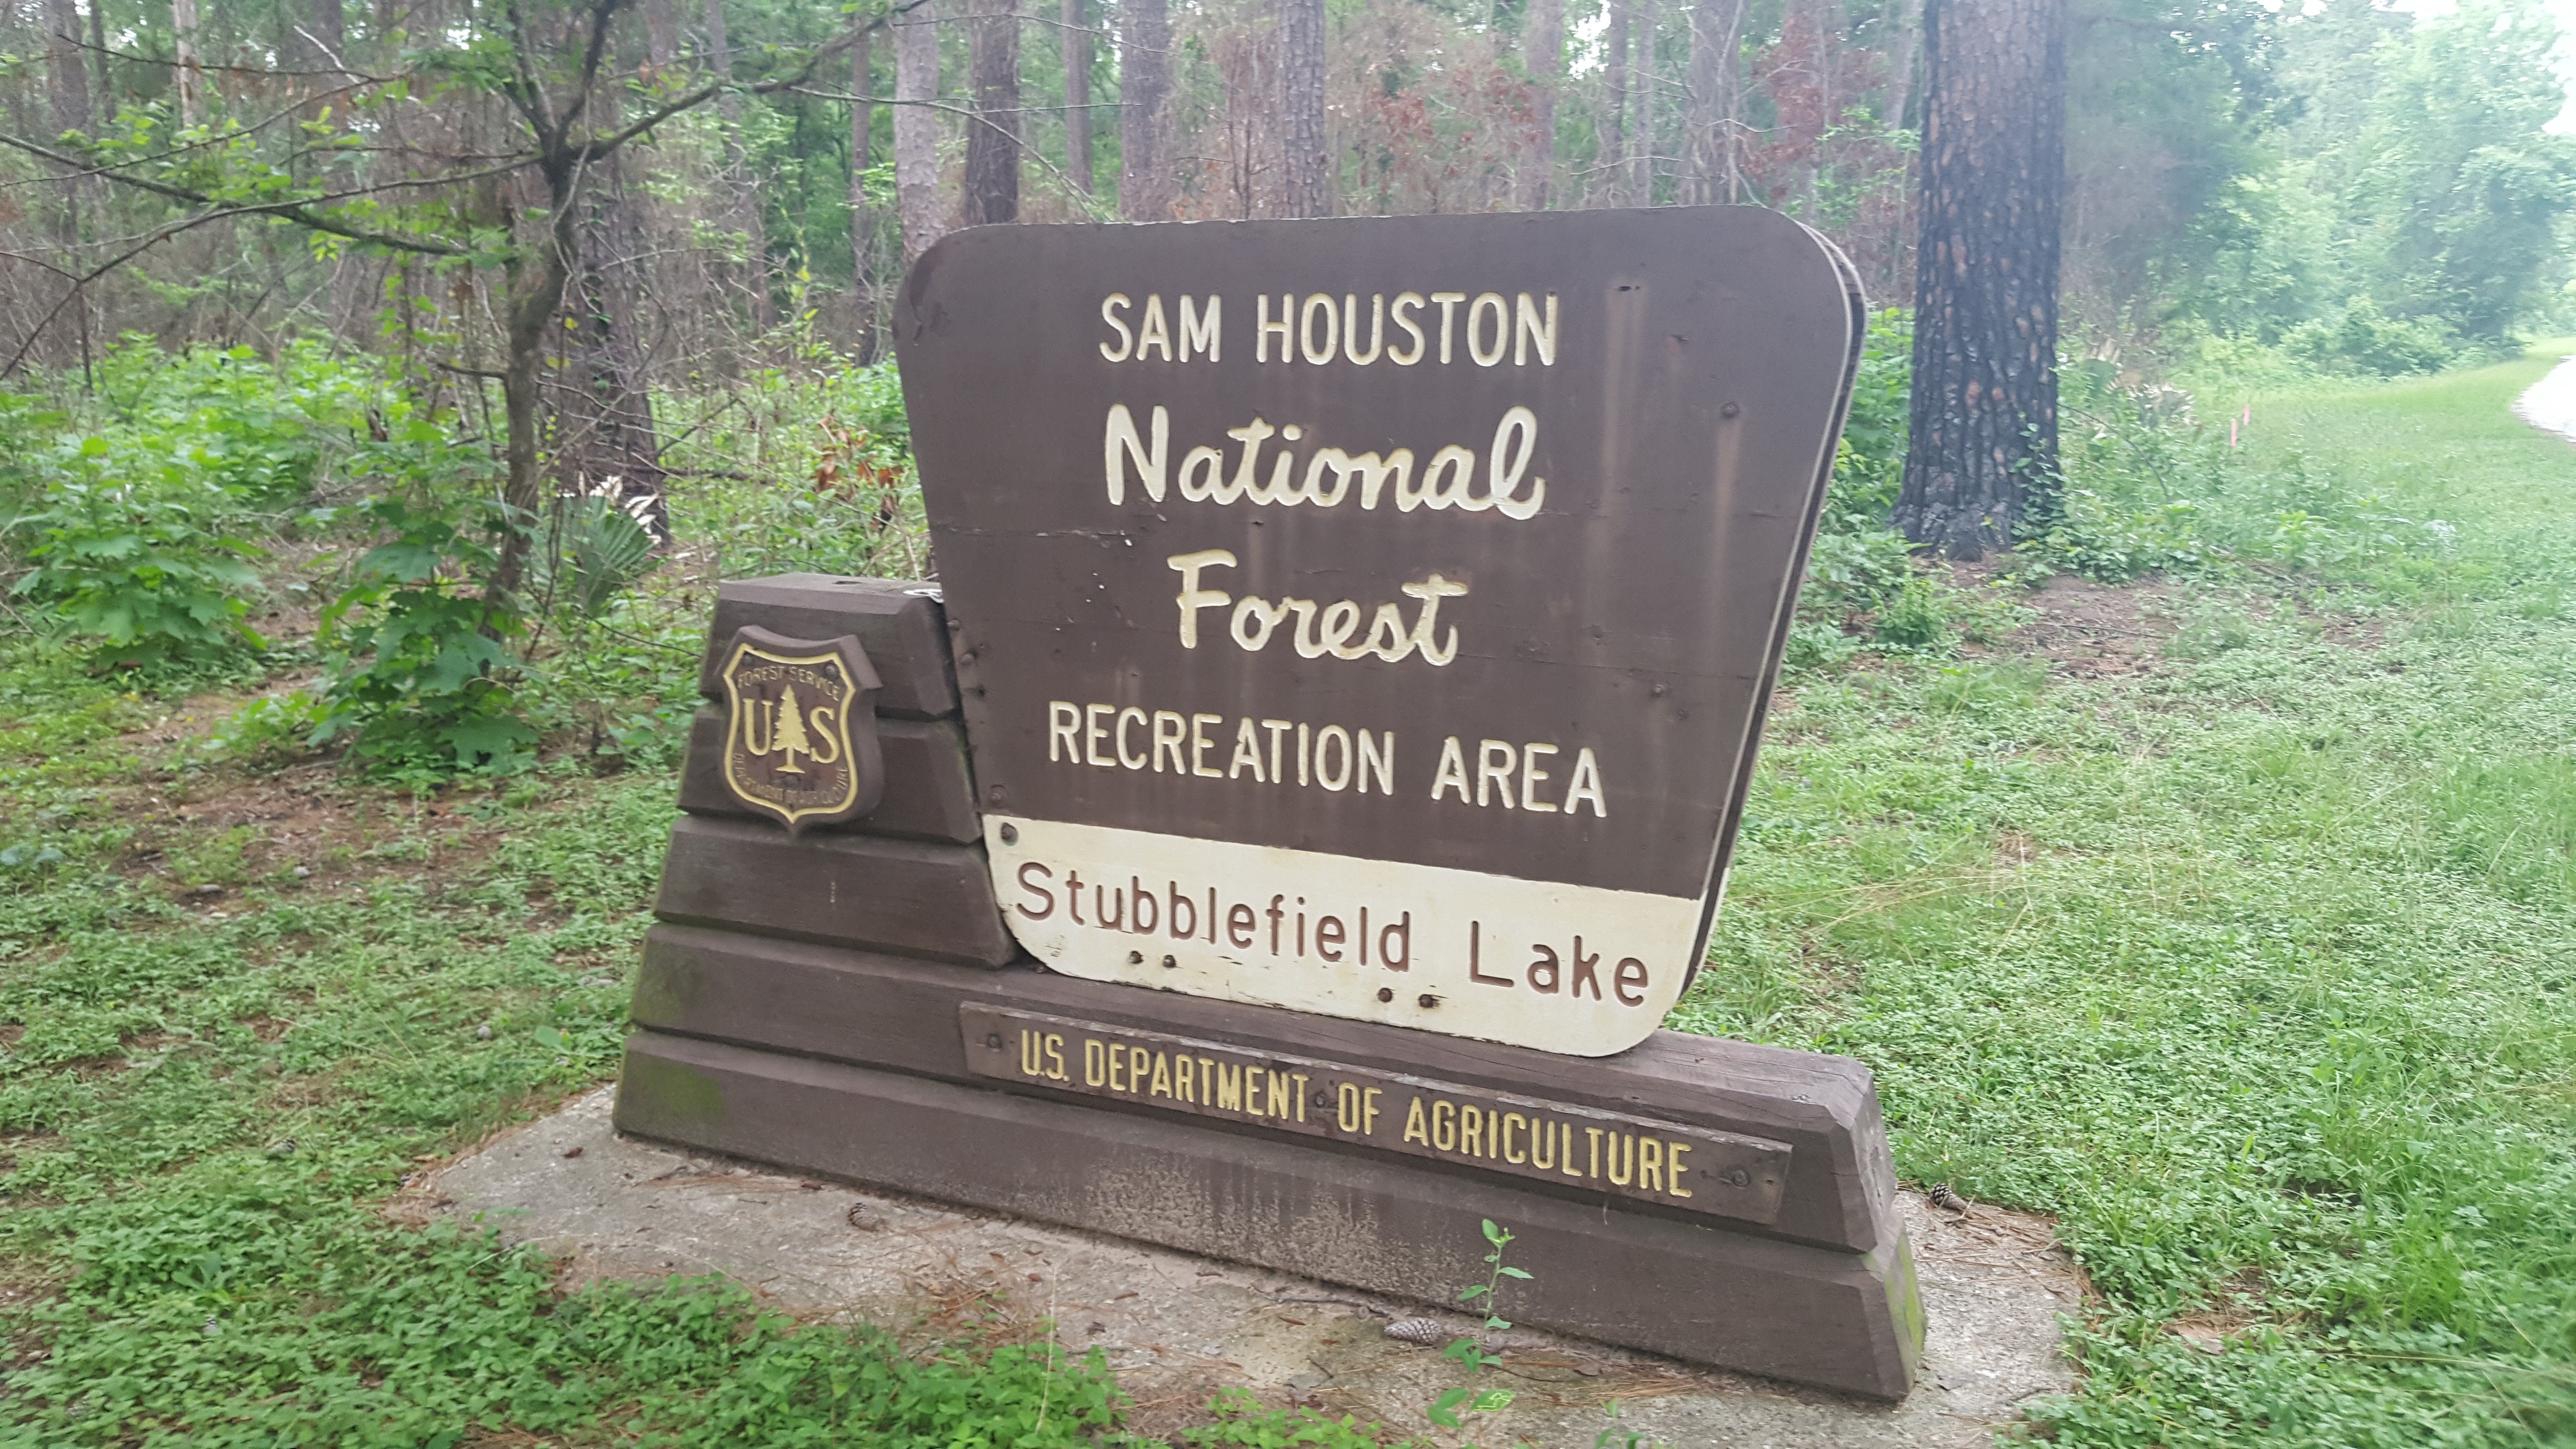 Camper submitted image from Stubblefield Lake Recreation Area - 2